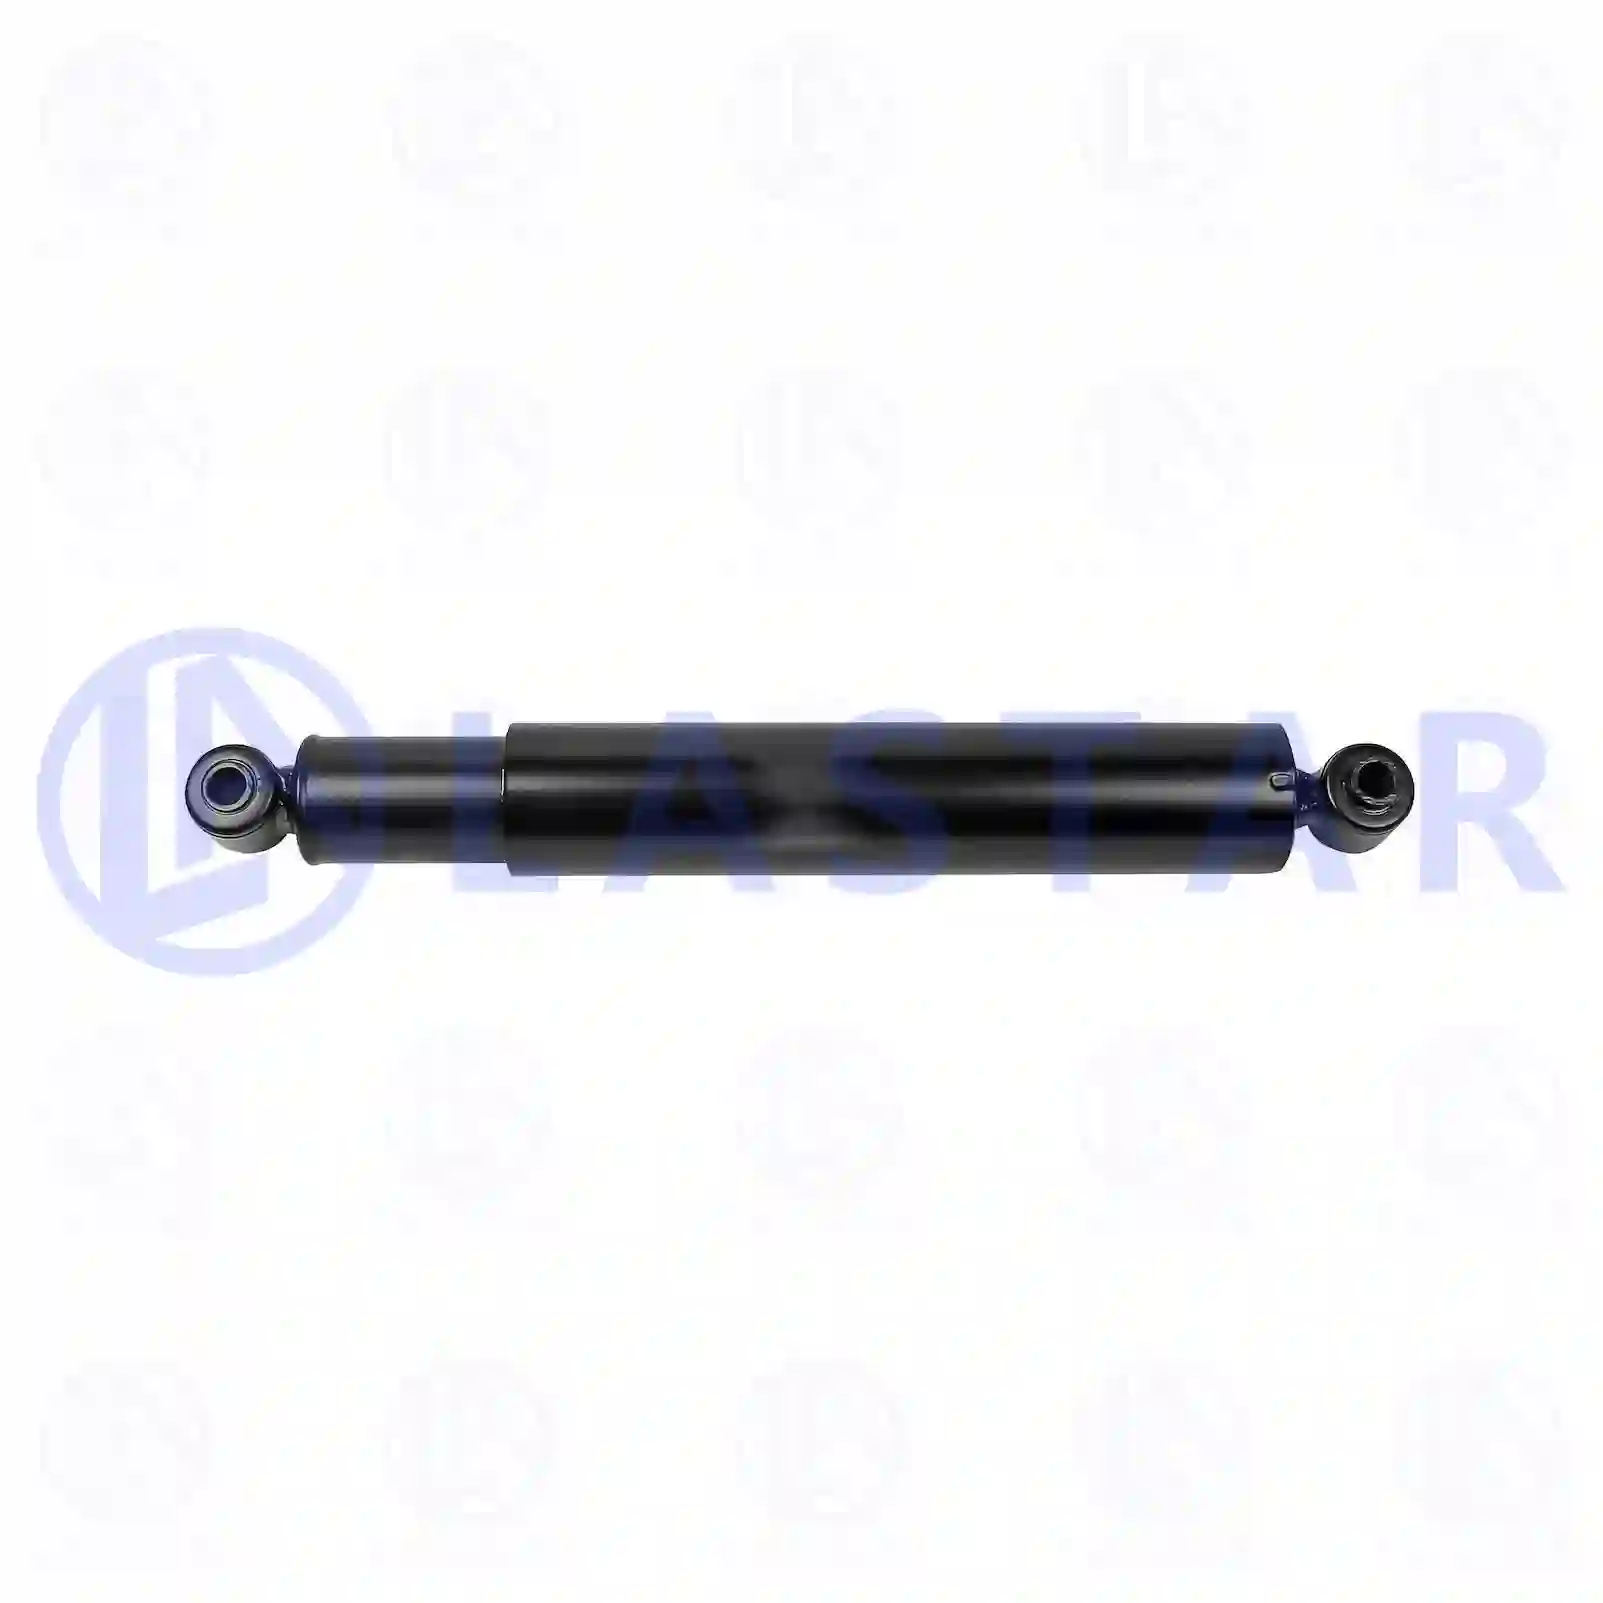 Shock absorber, 77727885, 9743231100, ZG41599-0008 ||  77727885 Lastar Spare Part | Truck Spare Parts, Auotomotive Spare Parts Shock absorber, 77727885, 9743231100, ZG41599-0008 ||  77727885 Lastar Spare Part | Truck Spare Parts, Auotomotive Spare Parts